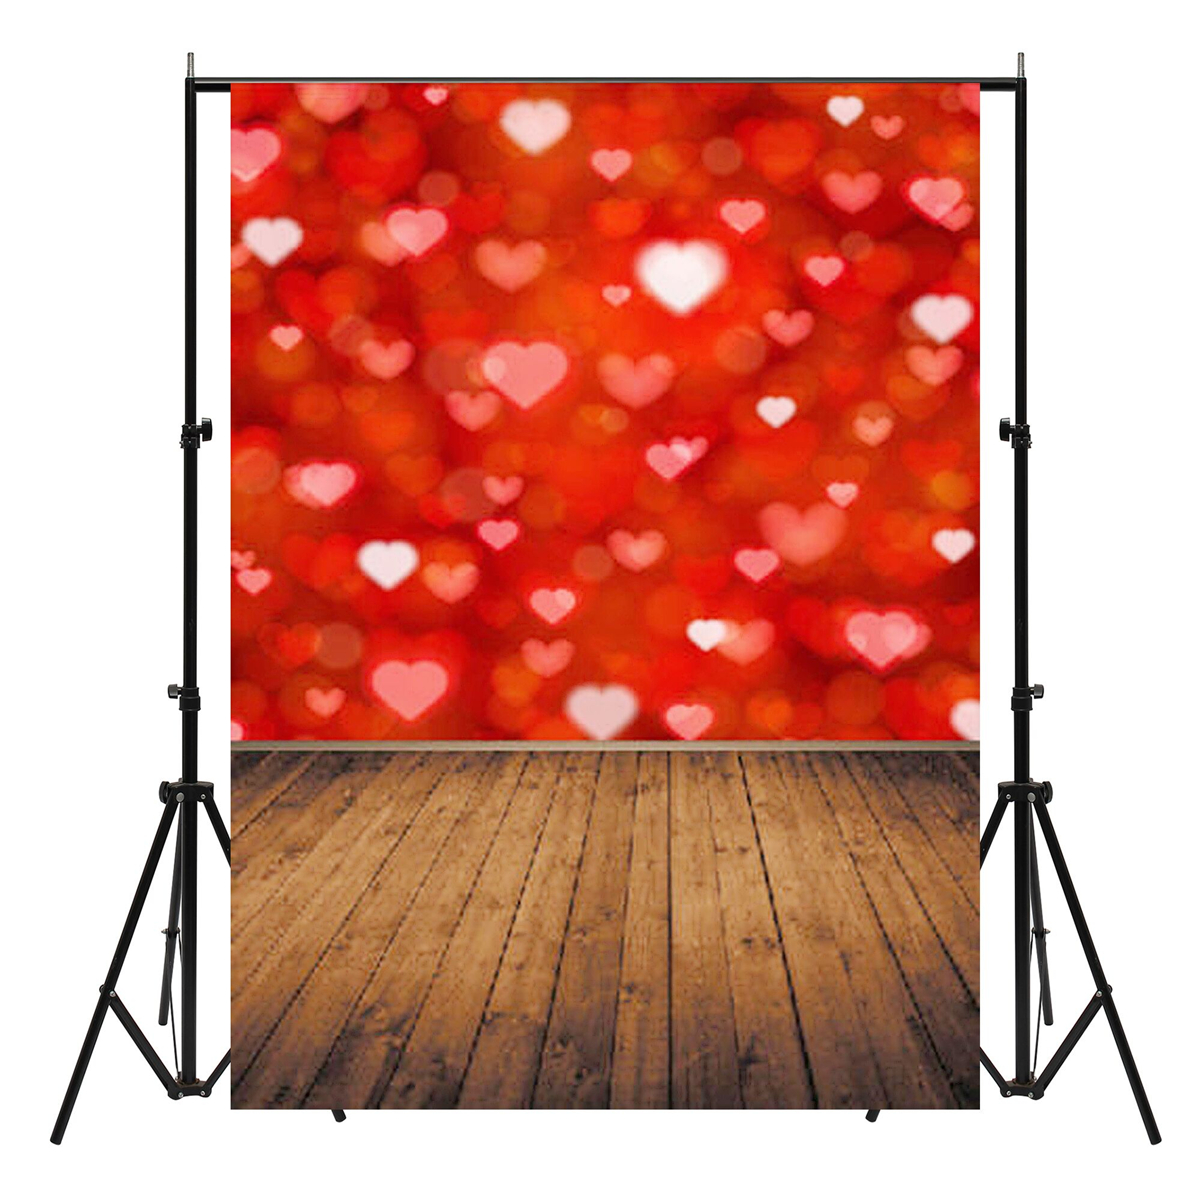 3x5FT-Vinyl-Valentines-Day-Red-Heart-Photography-Backdrop-Background-Studio-Prop-1388194-1